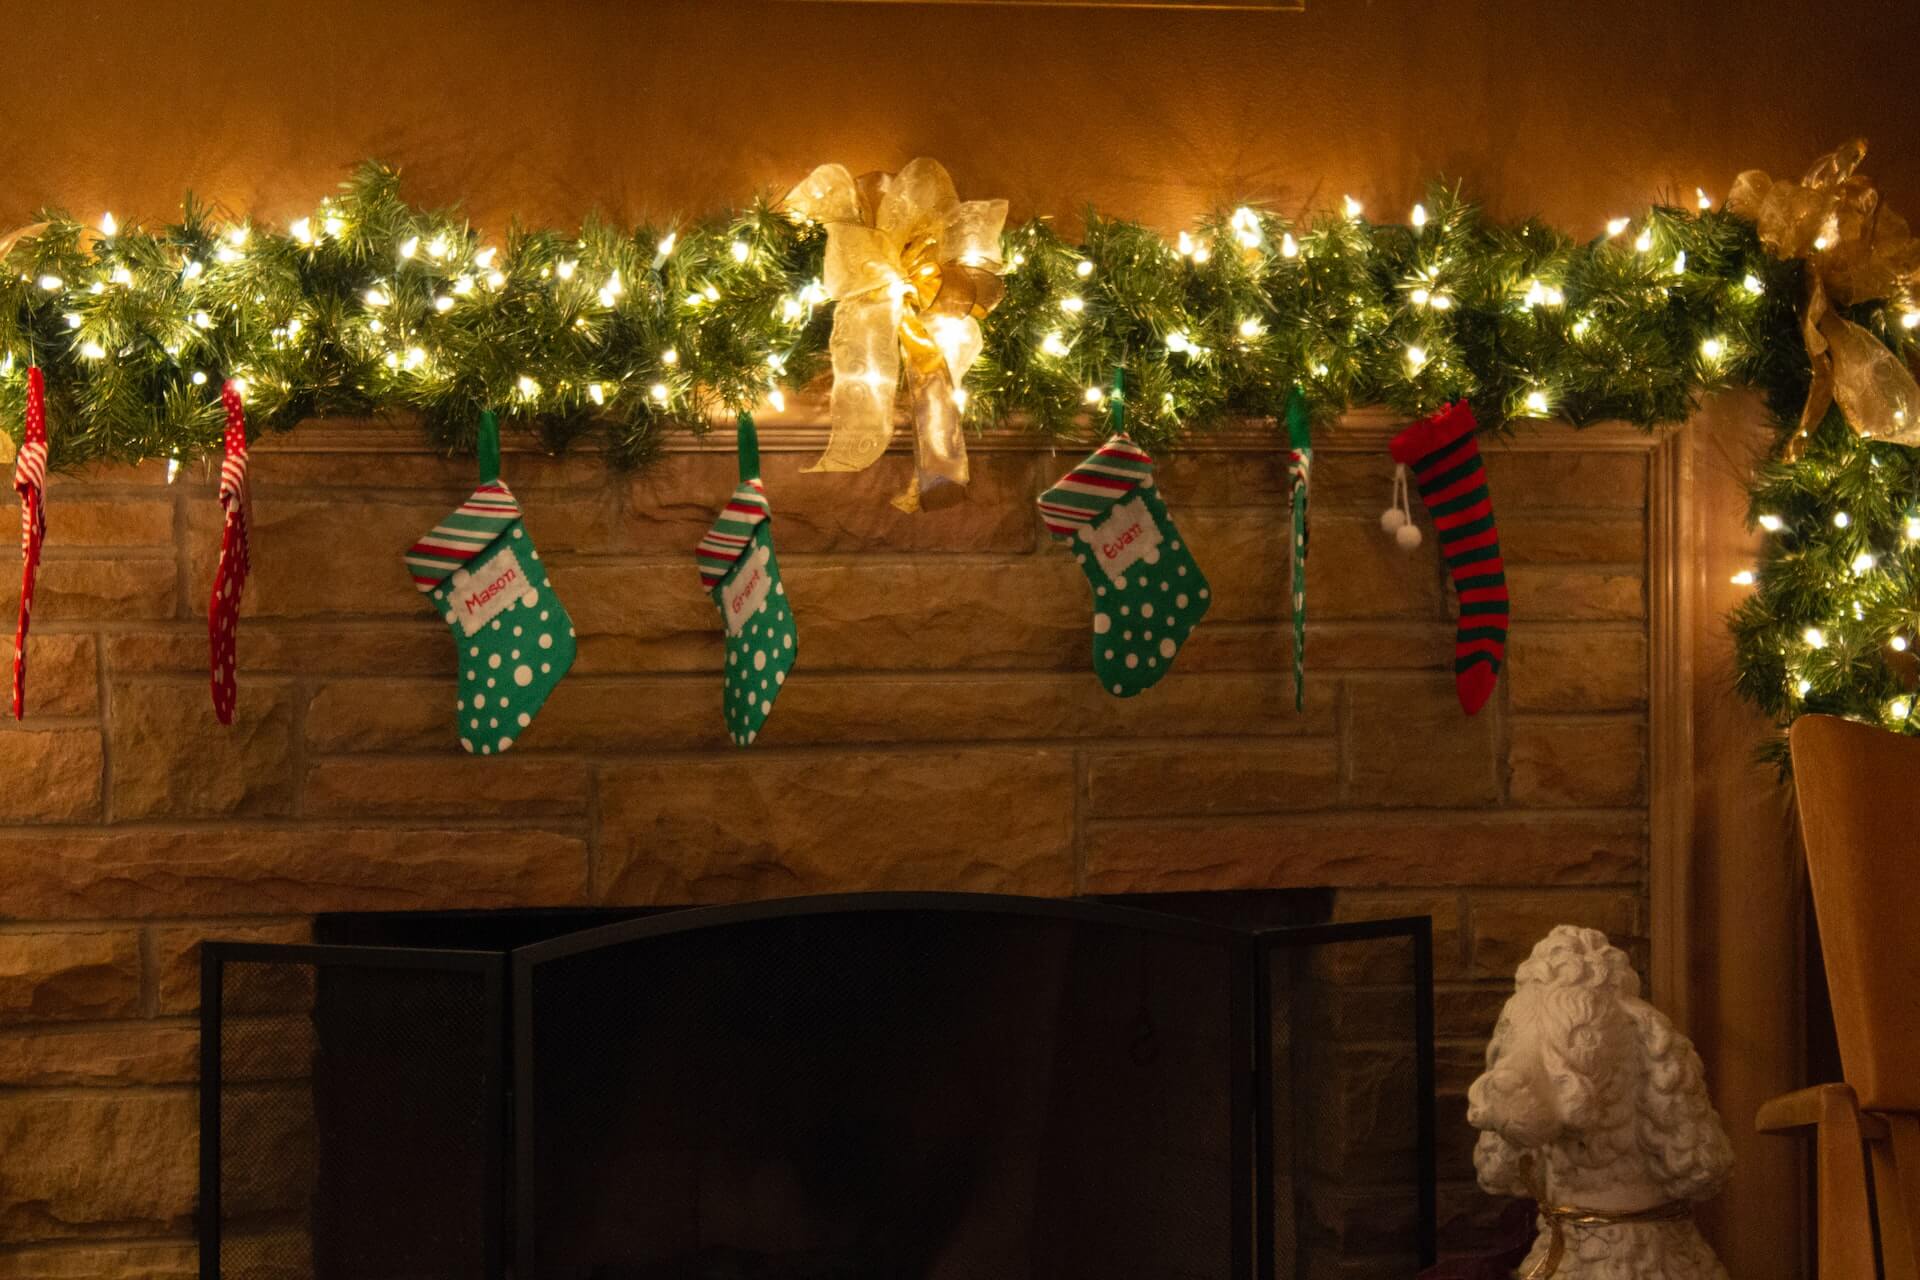 Christmas Decorating Ideas for a Mantel